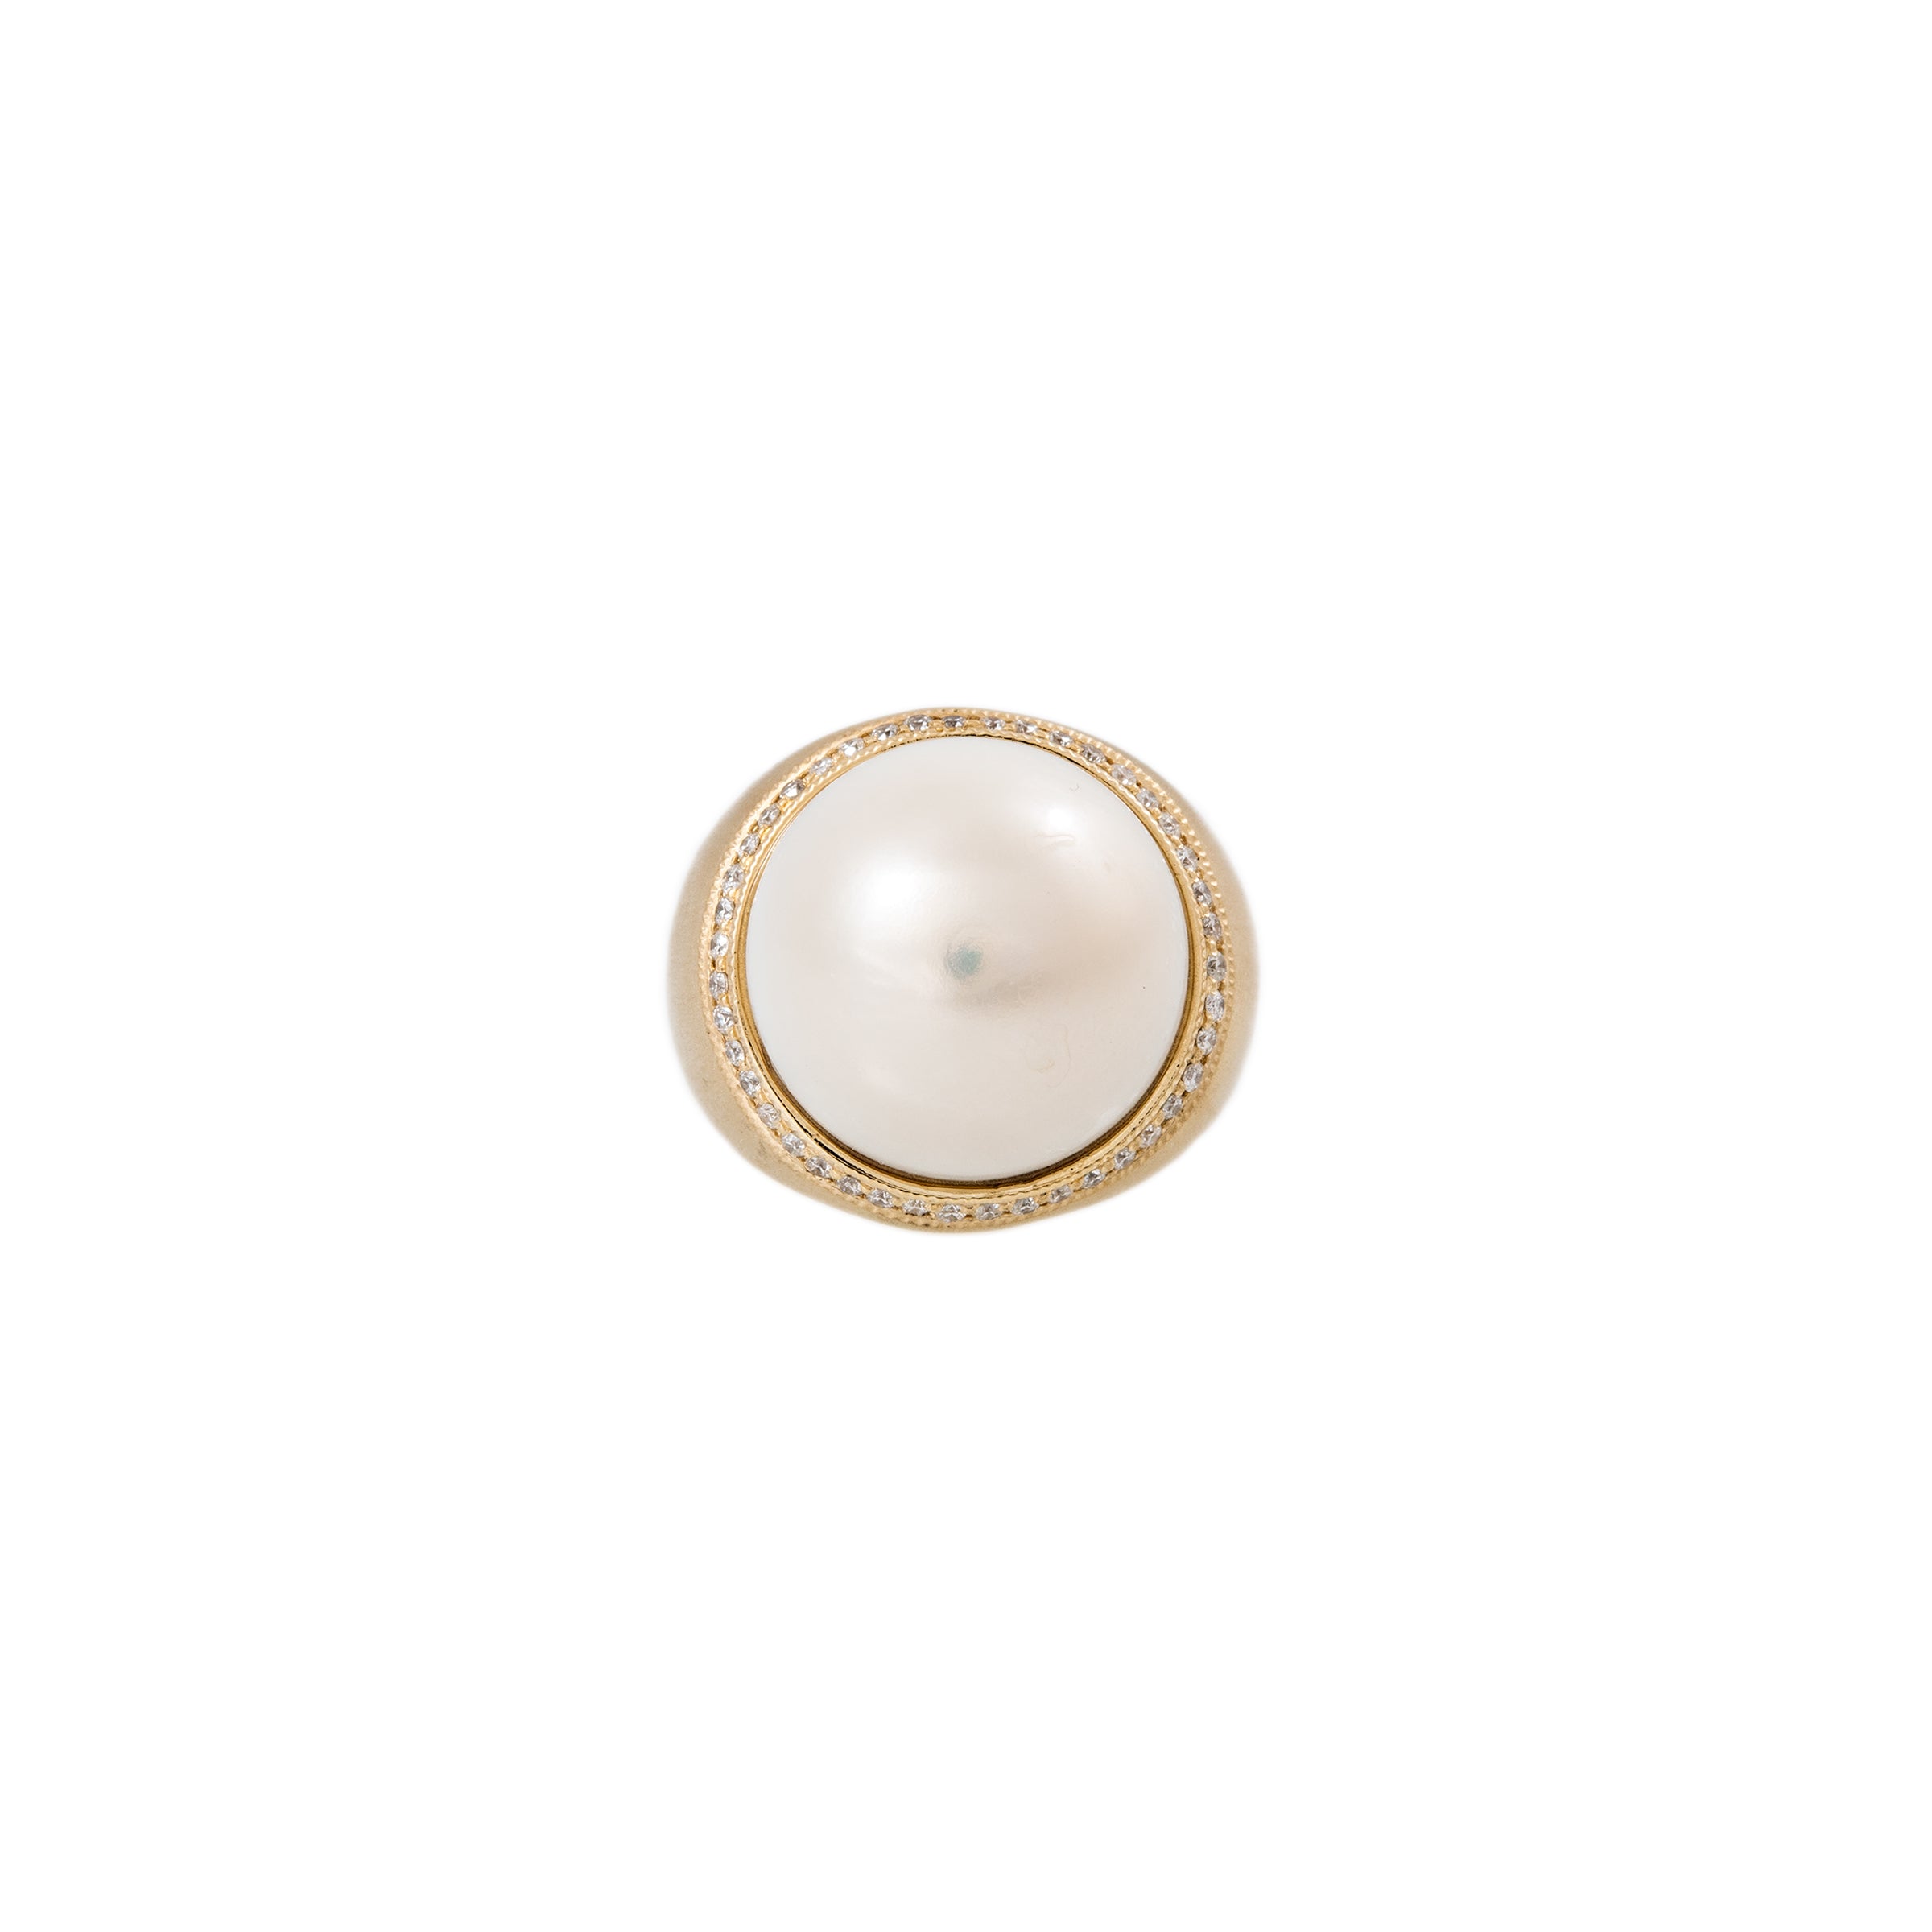 PAVE ROUND PEARL SATIN RING